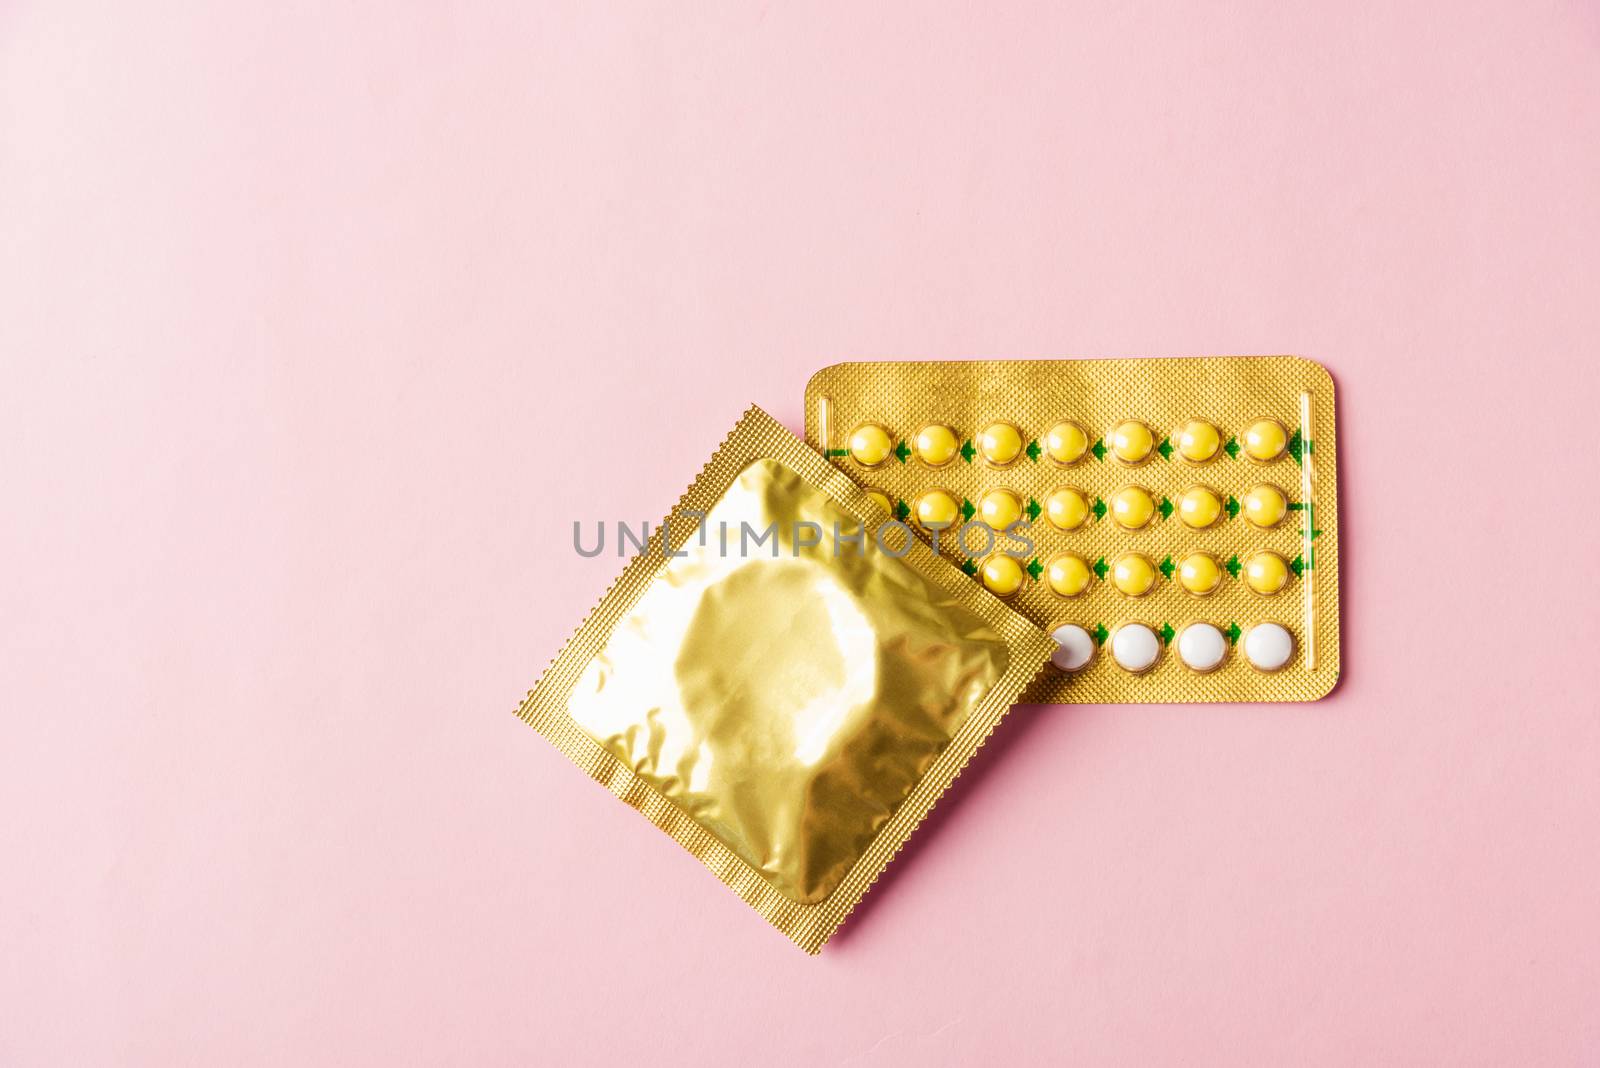 Condom in wrapper pack and contraceptive pills blister by Sorapop